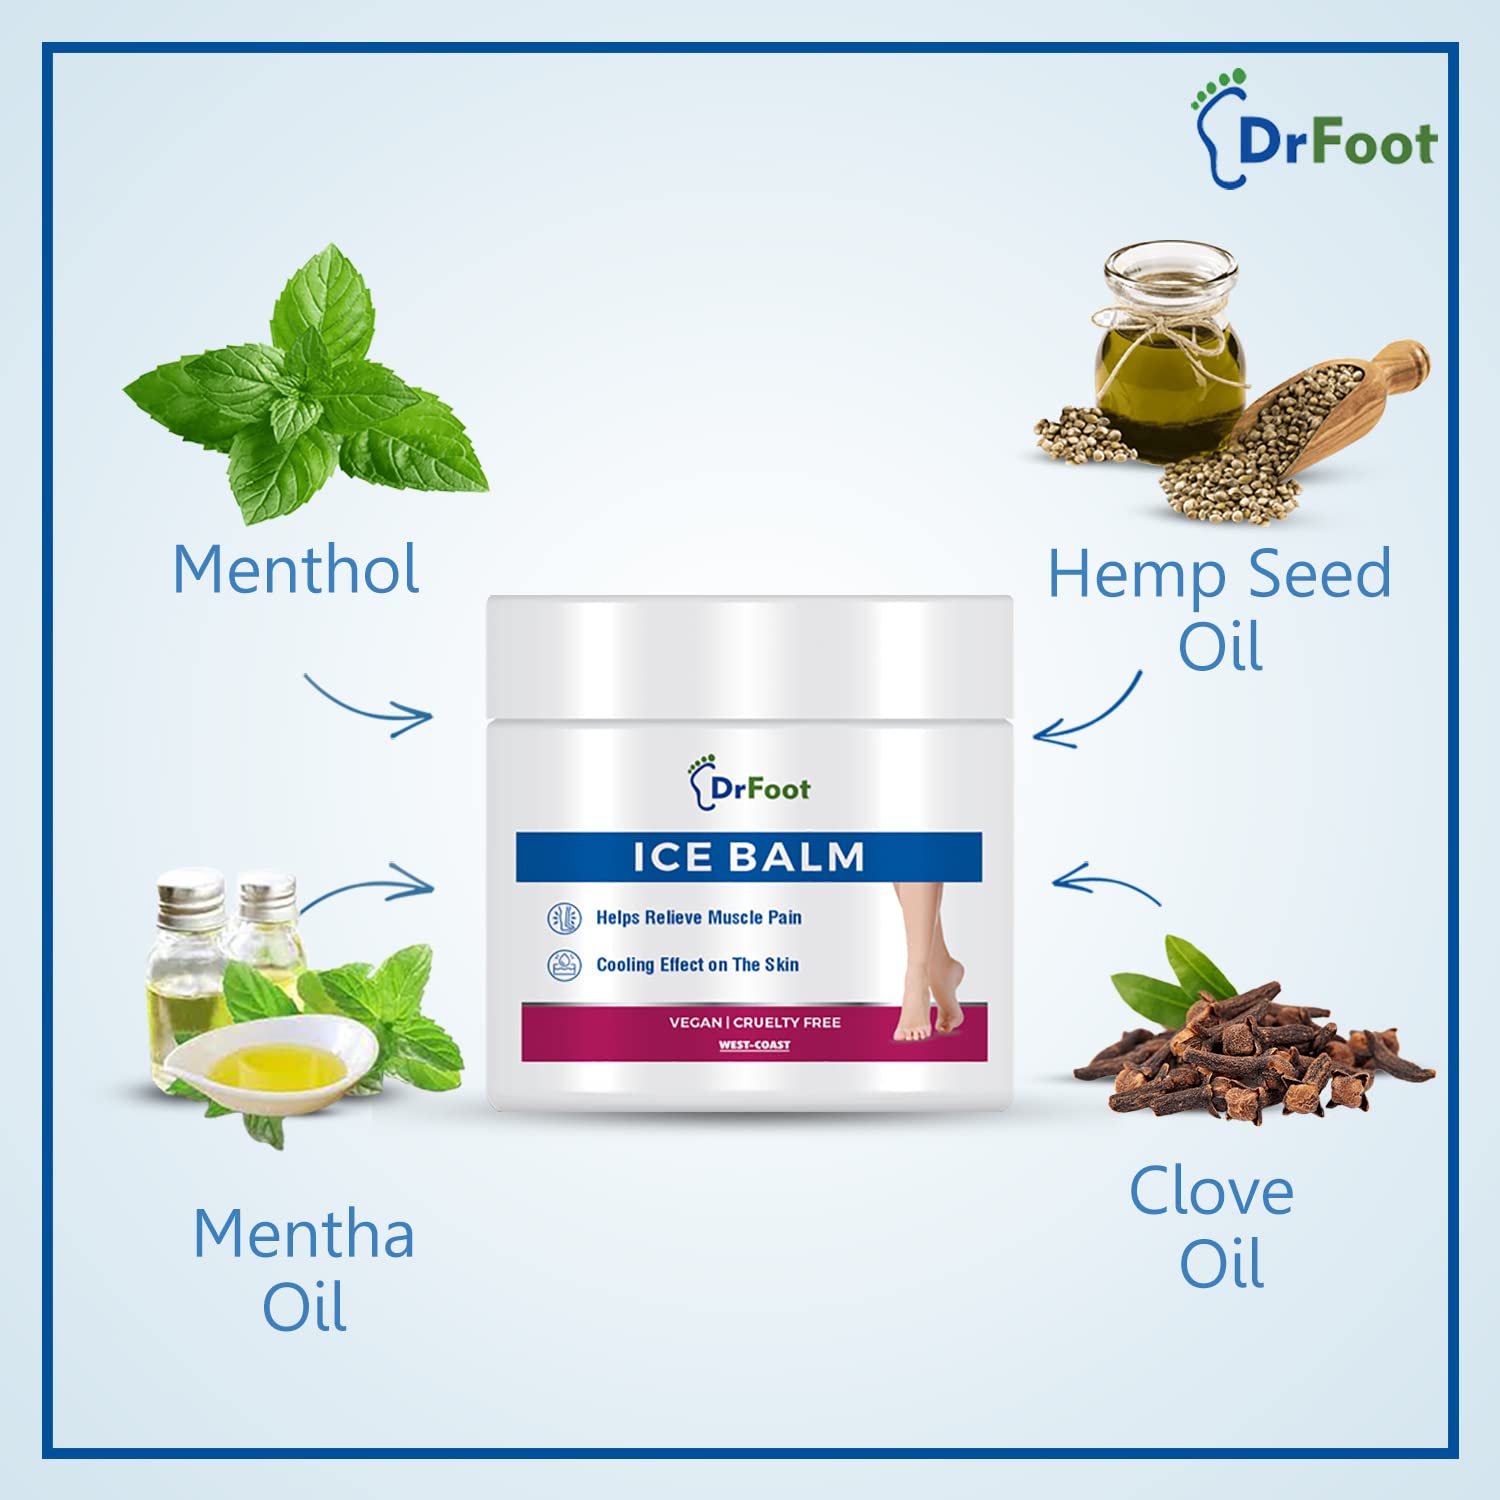 Dr Foot Ice Balm Cold with the Goodness of Menthol, Mentha Oil, Hemp Seed Oil, Glycerin - 100gm (Pack of 3)